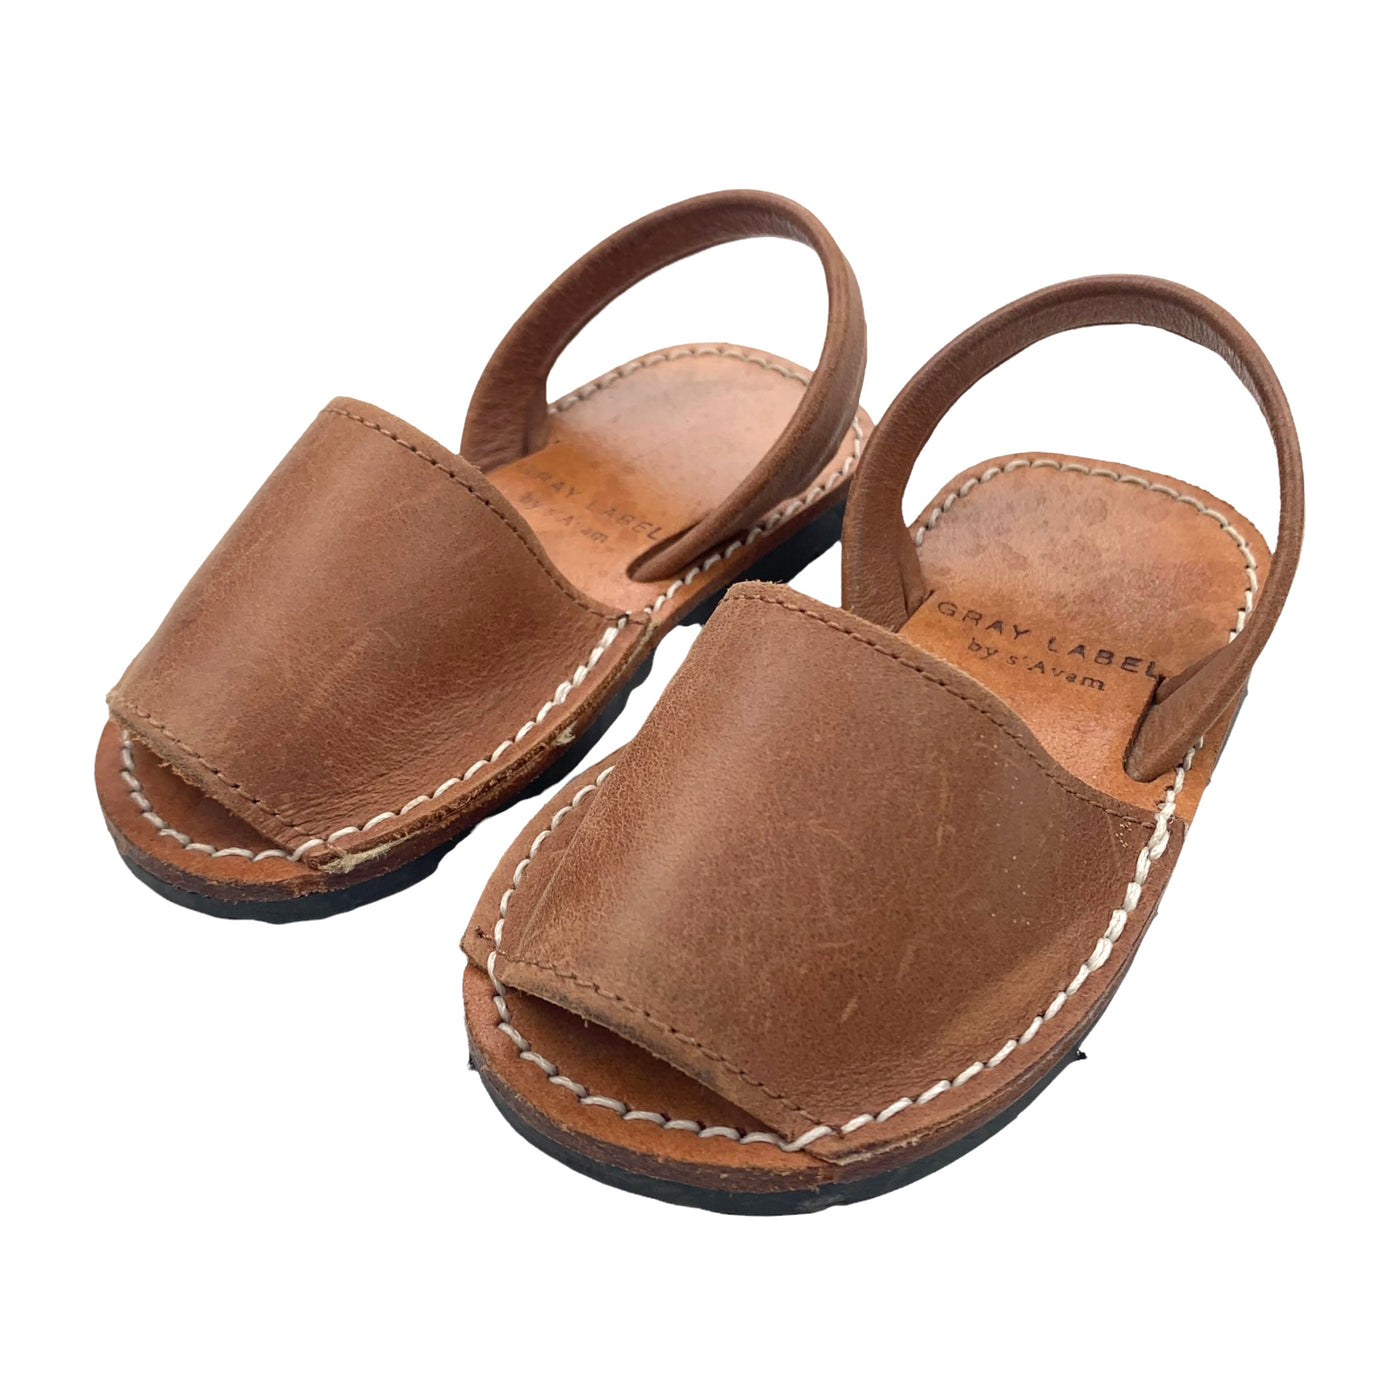 Graylabel sandals by d'Avam size 22